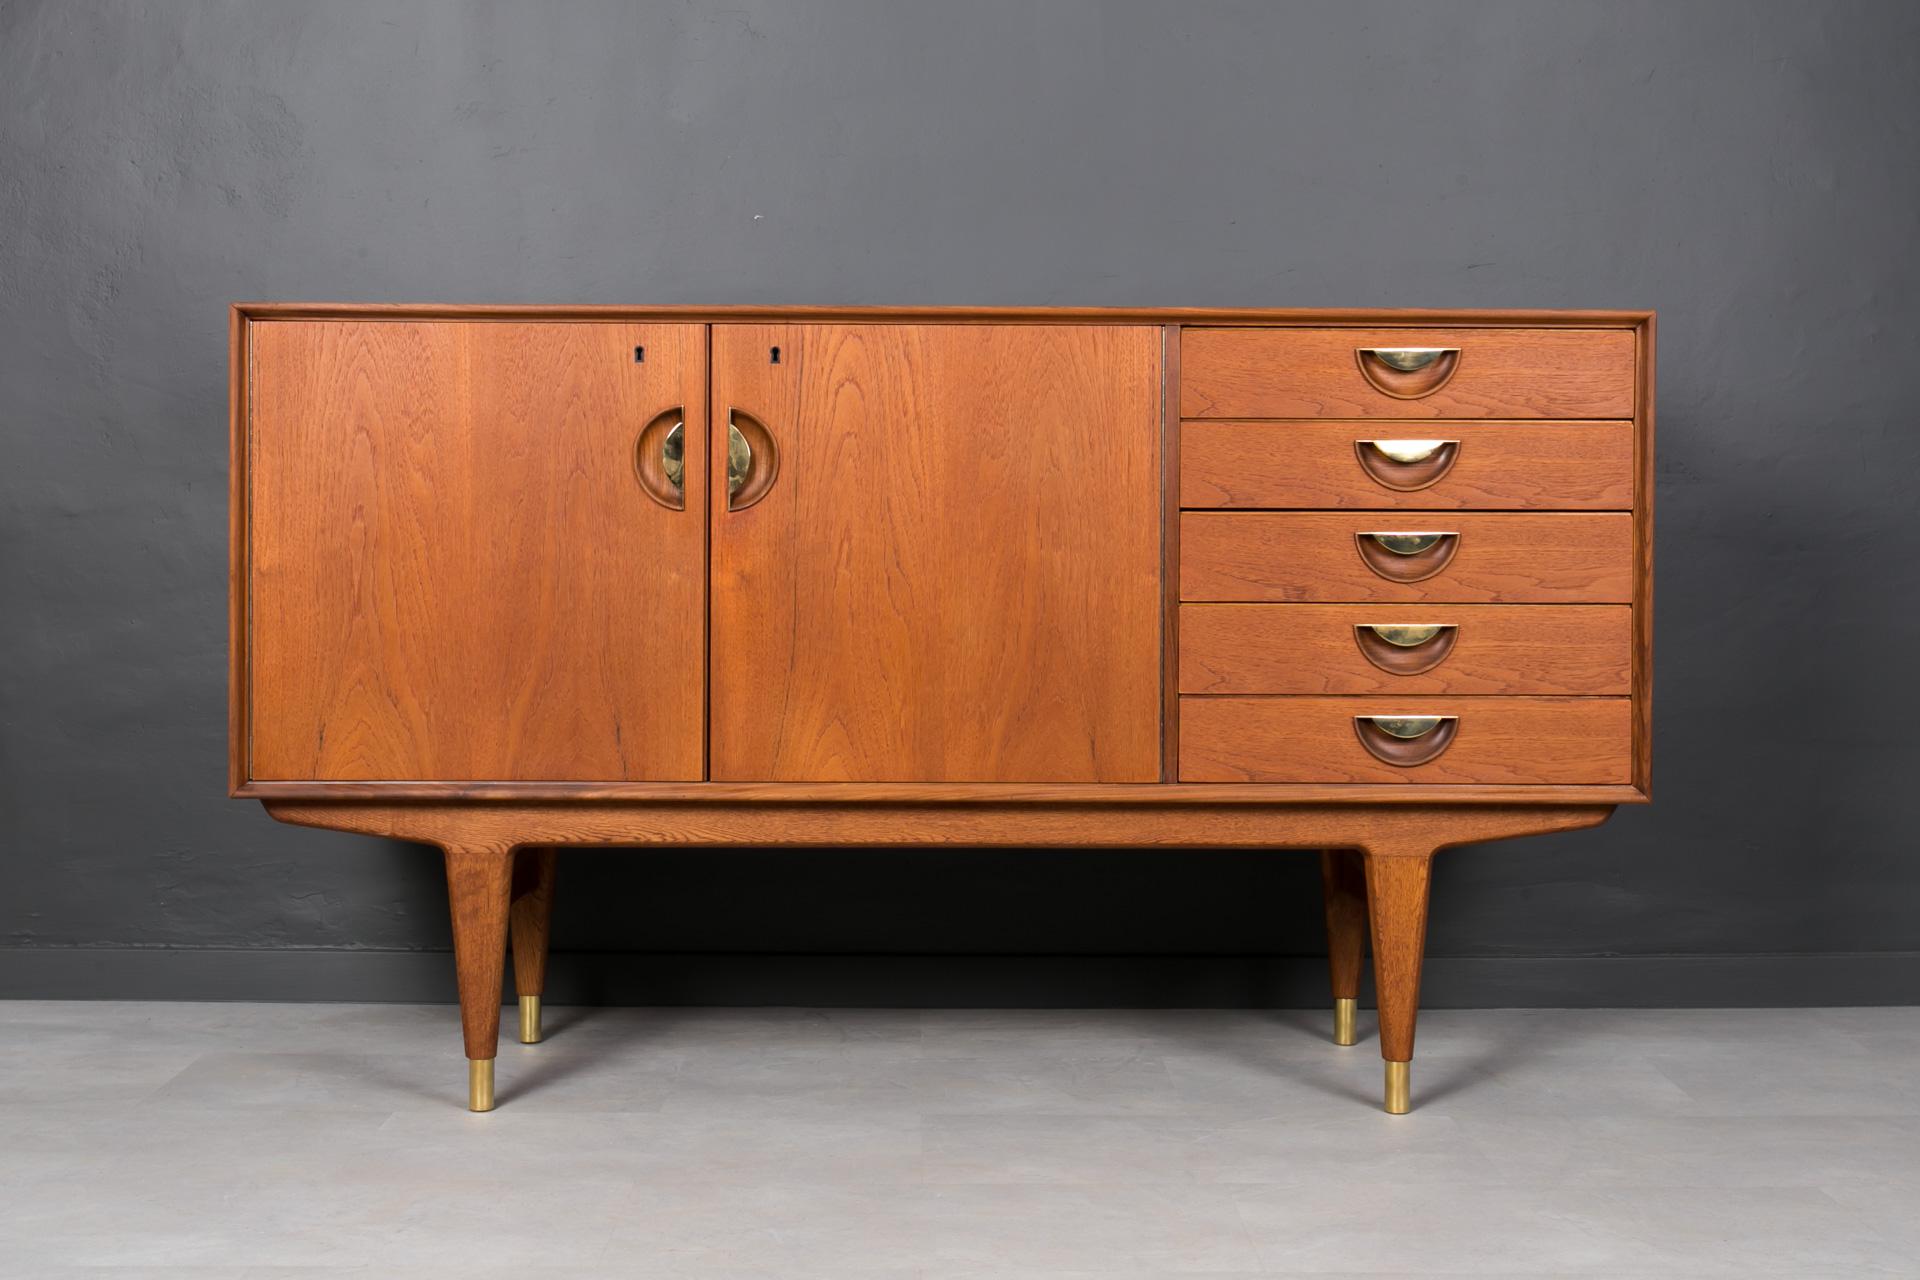 This beautiful teak sideboard was made in Denmark around 1950s. It has one big storage section with height adjustable shelf behind the doors (lockable with a key) and five drawers in the section on the right. The sideboard features beautiful teak